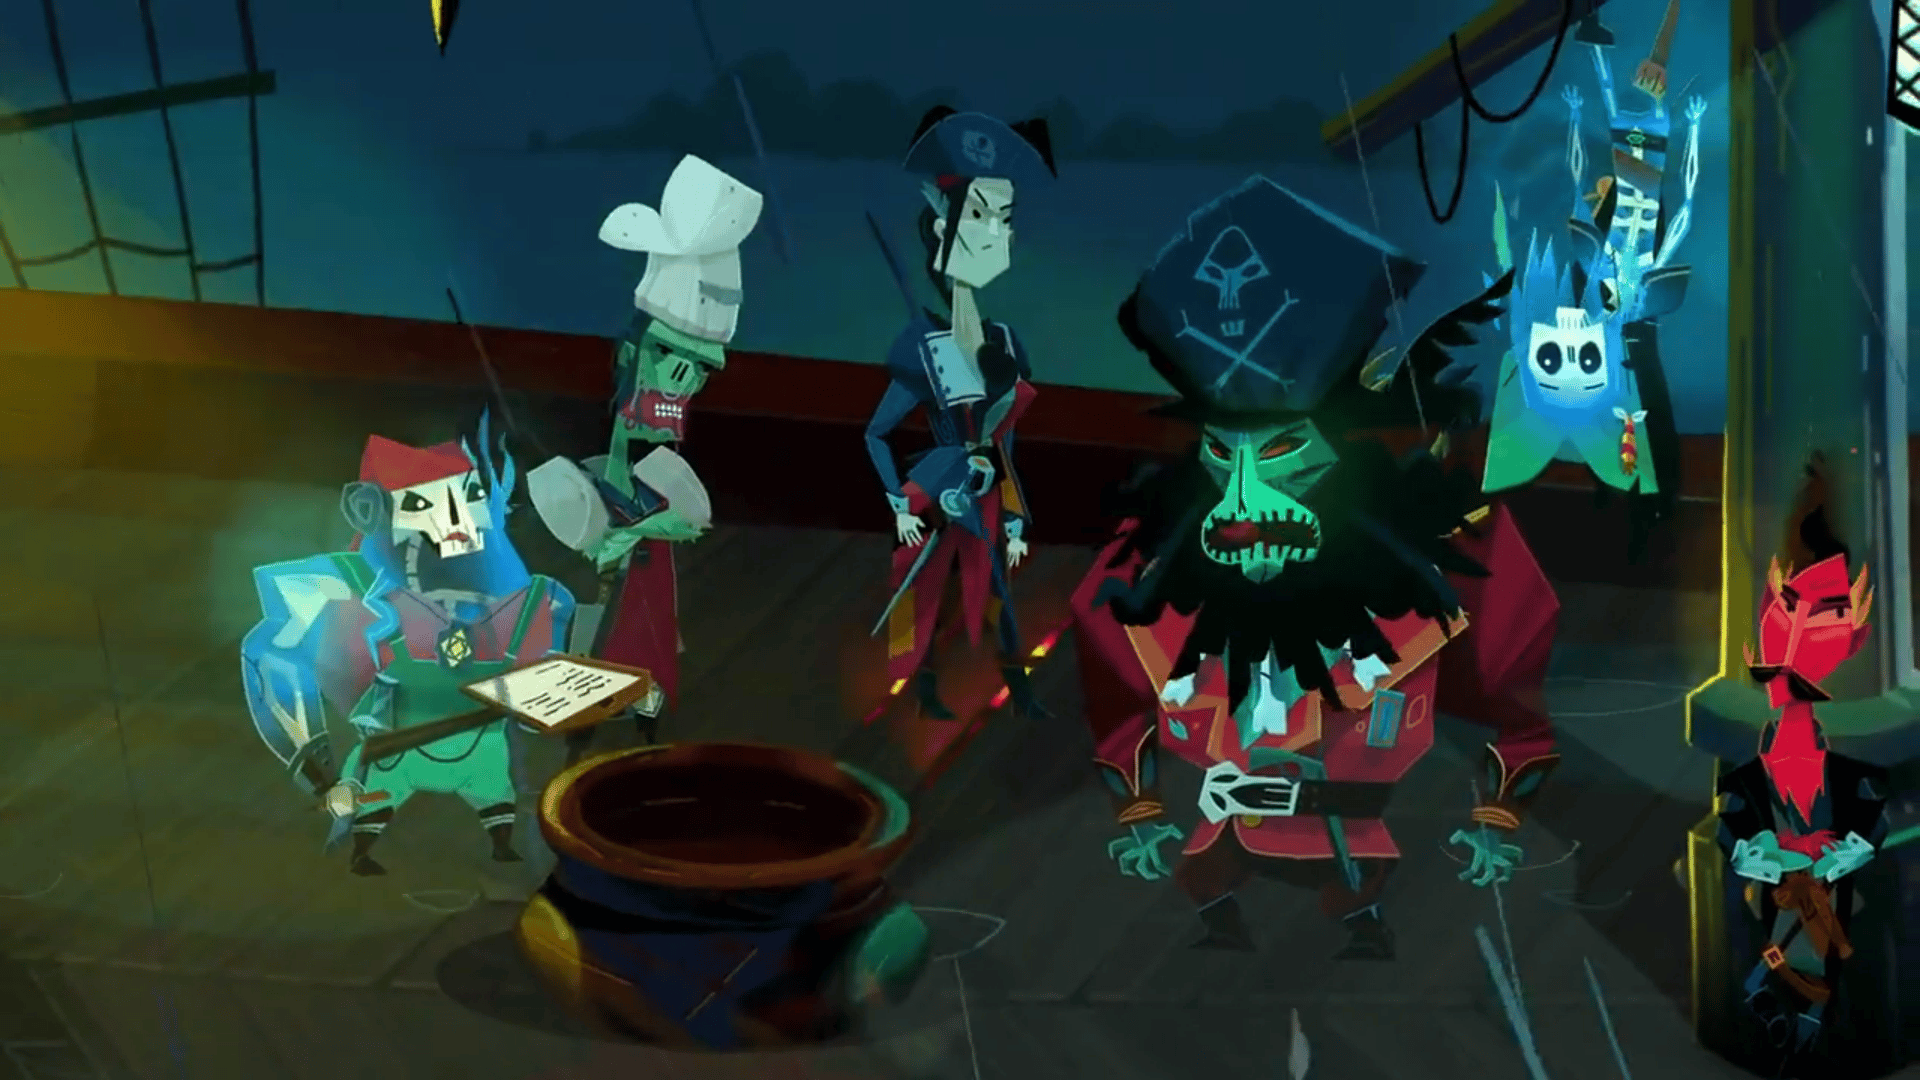 Return to Monkey Island: New clip shows LeChuck and his crew - News